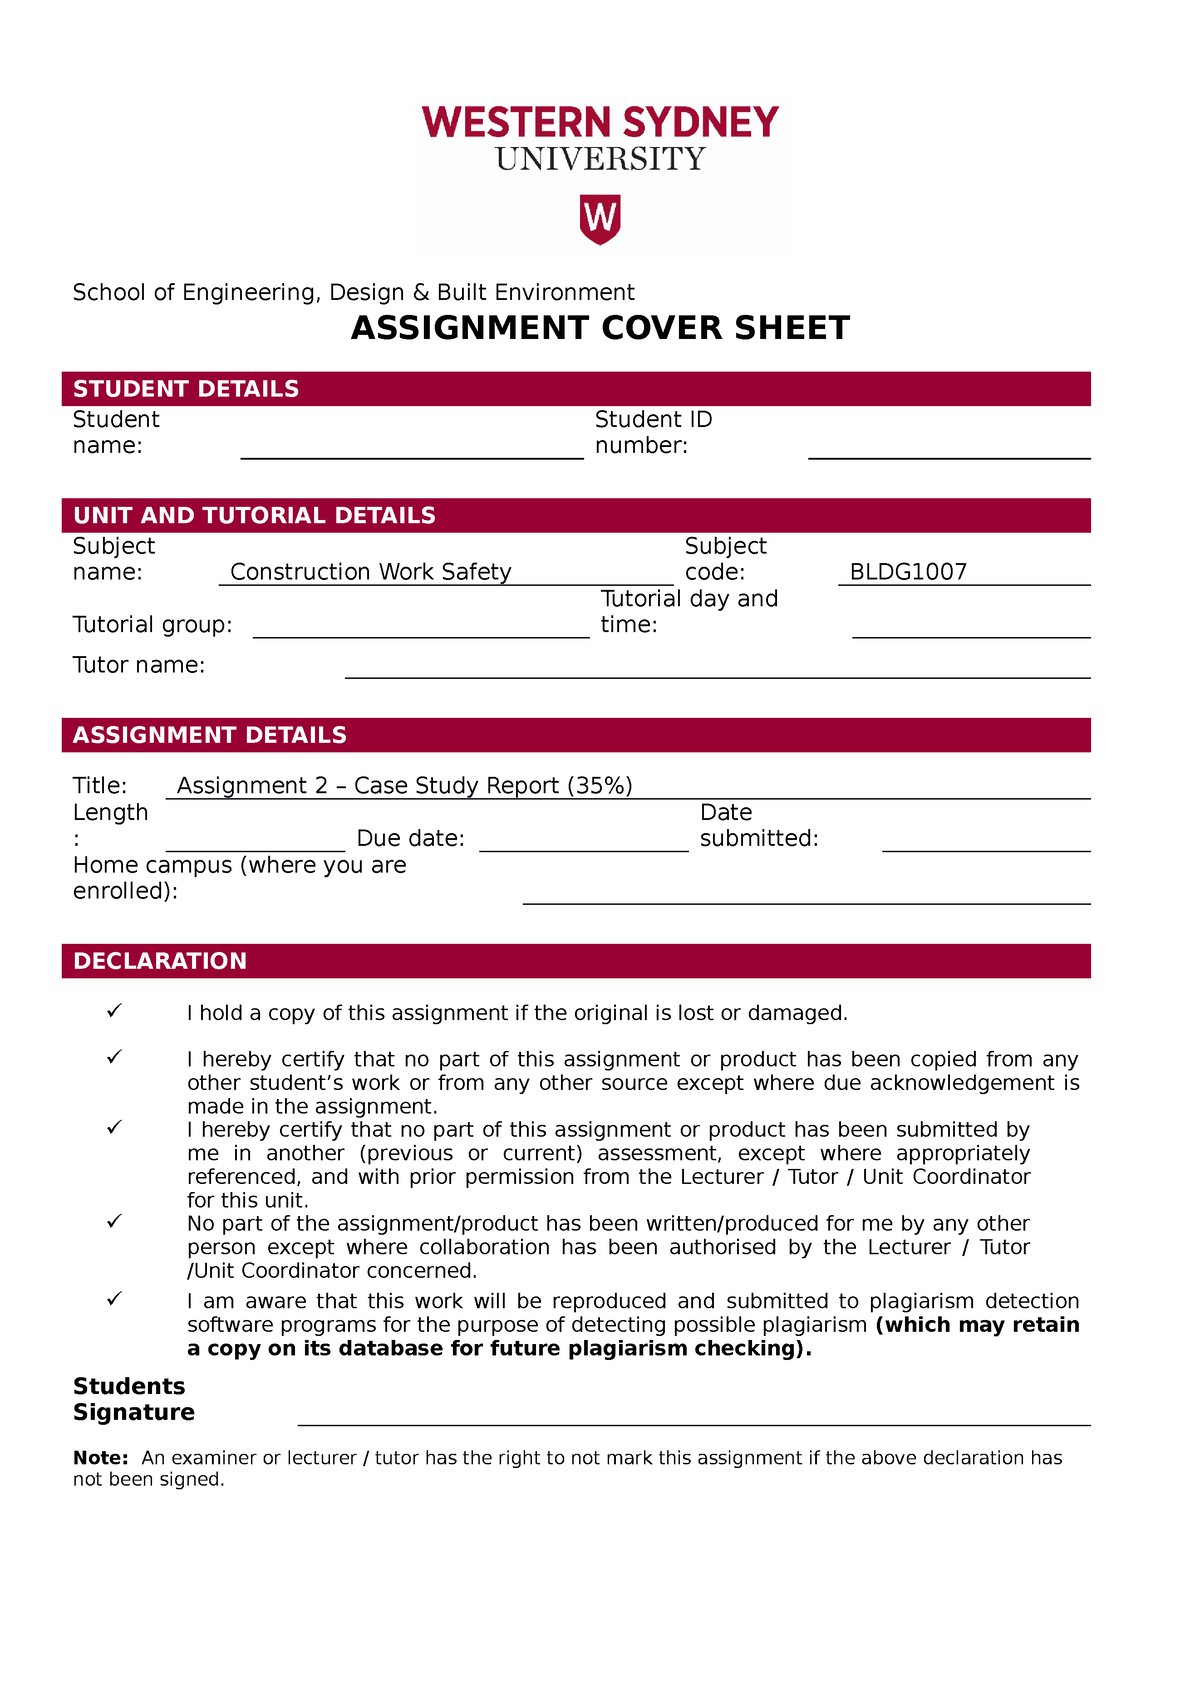 wsu individual assignment cover sheet